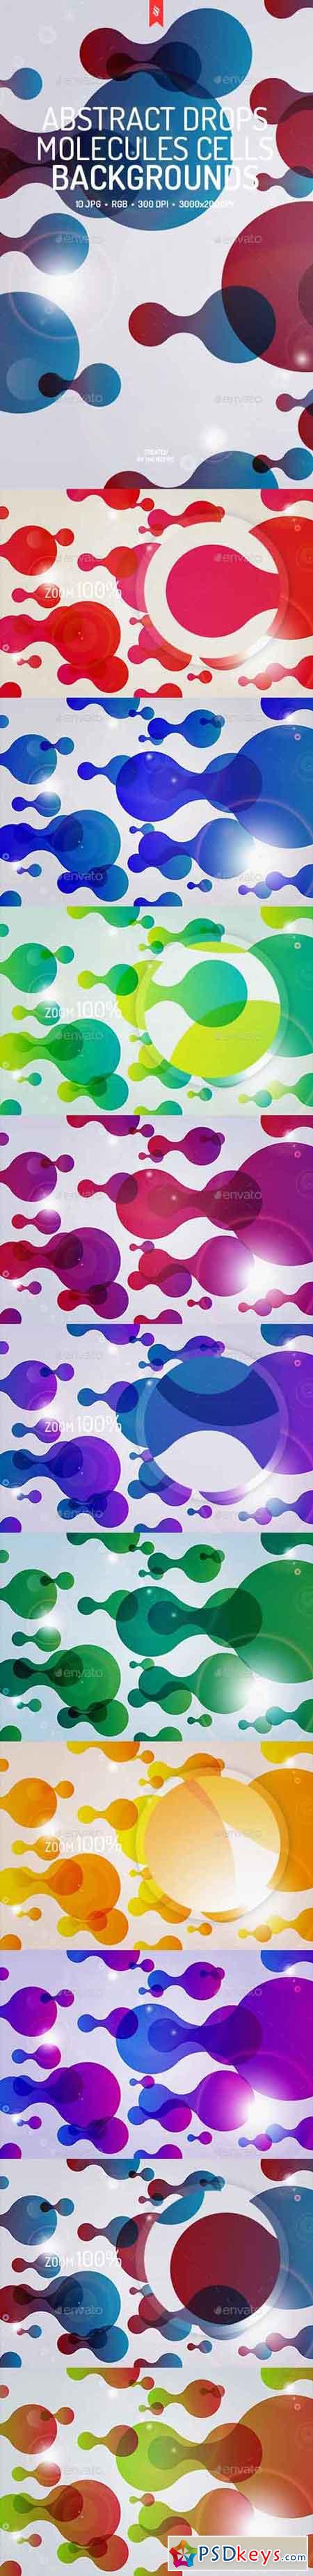 Abstract Drops, Molecules, Cells Backgrounds 19387163